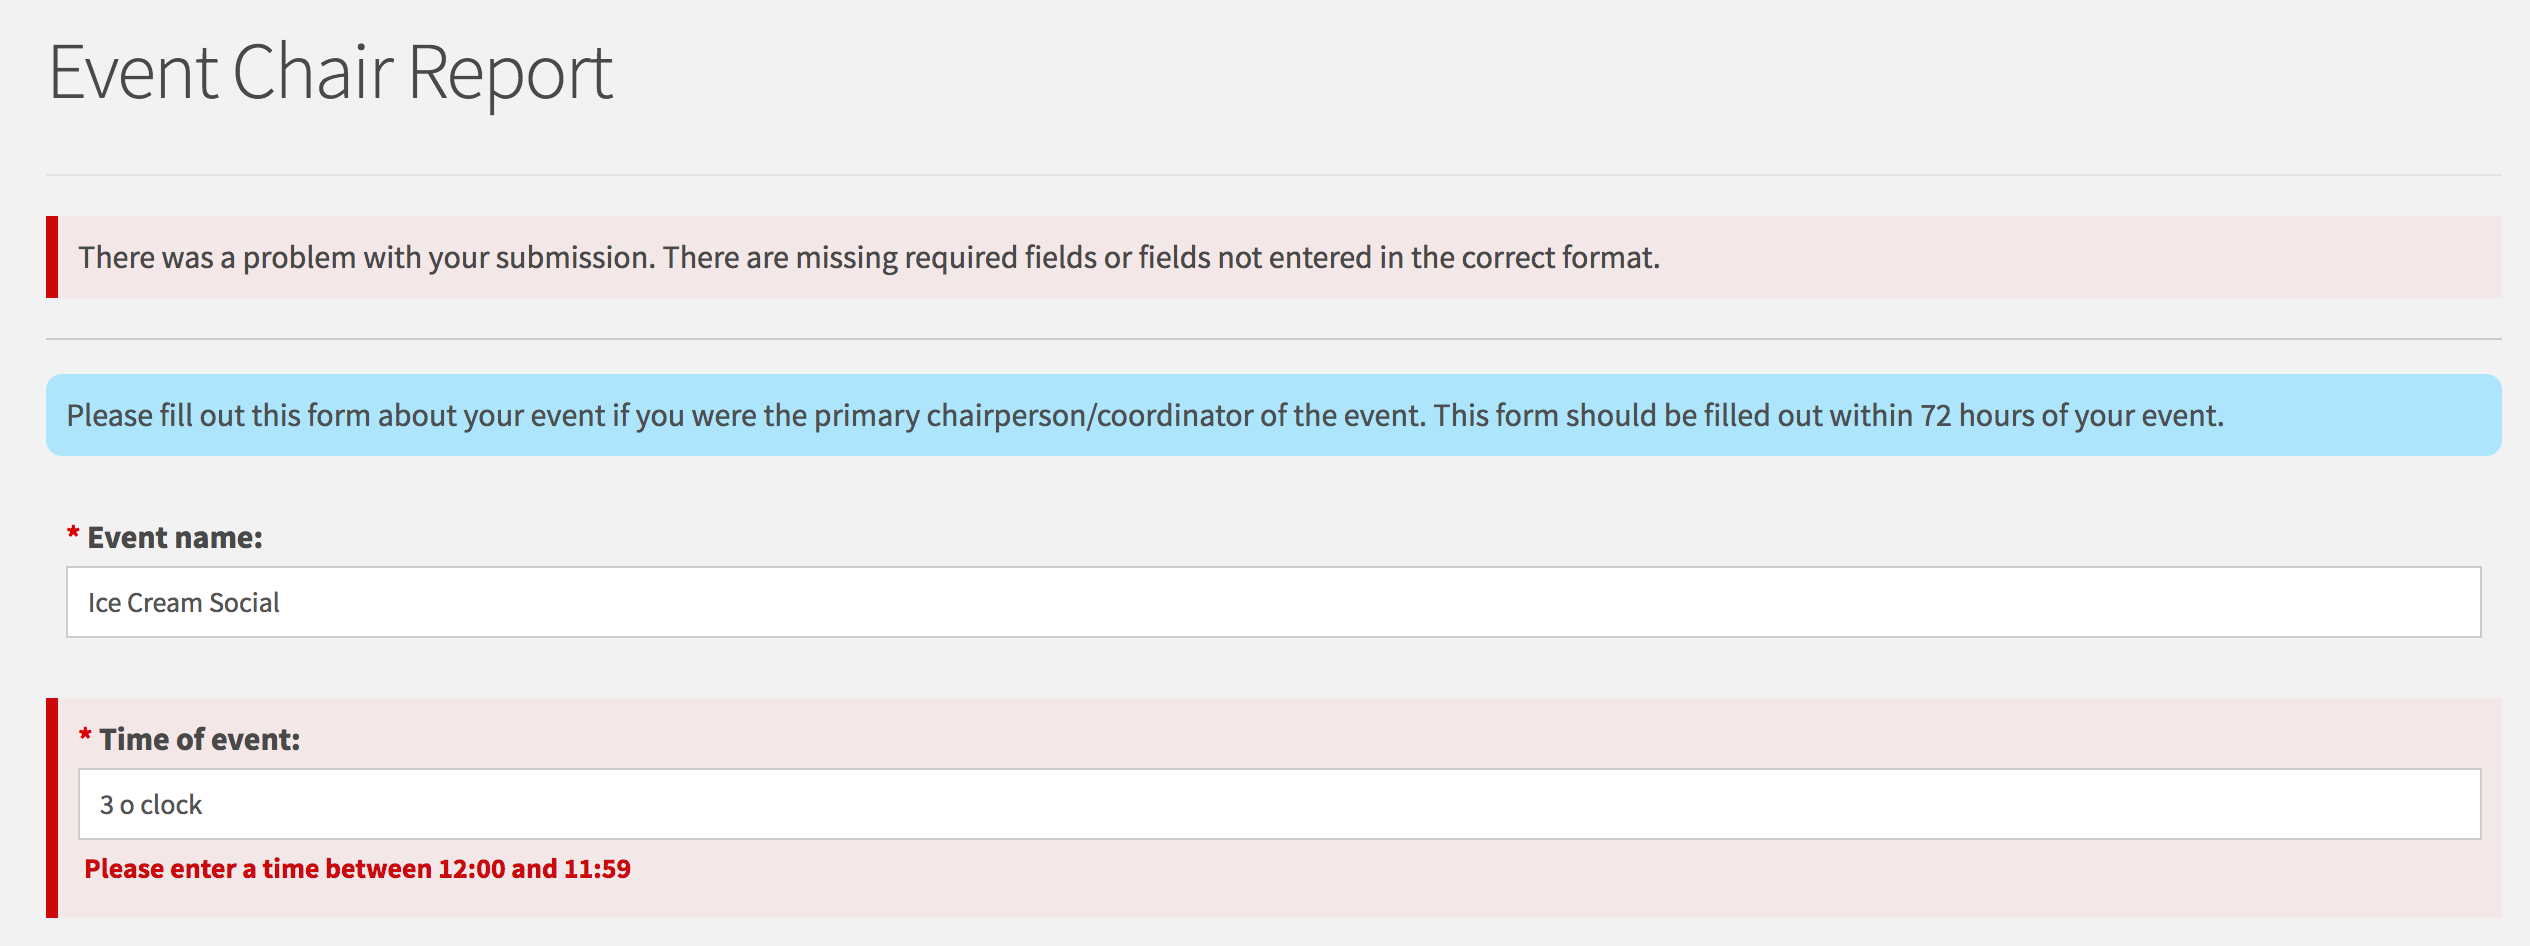 The screenshot displays the error for a form that does not meet its validation. The screenshot has the problematic fields highlighted with an explanation to the user describing what they missed. 